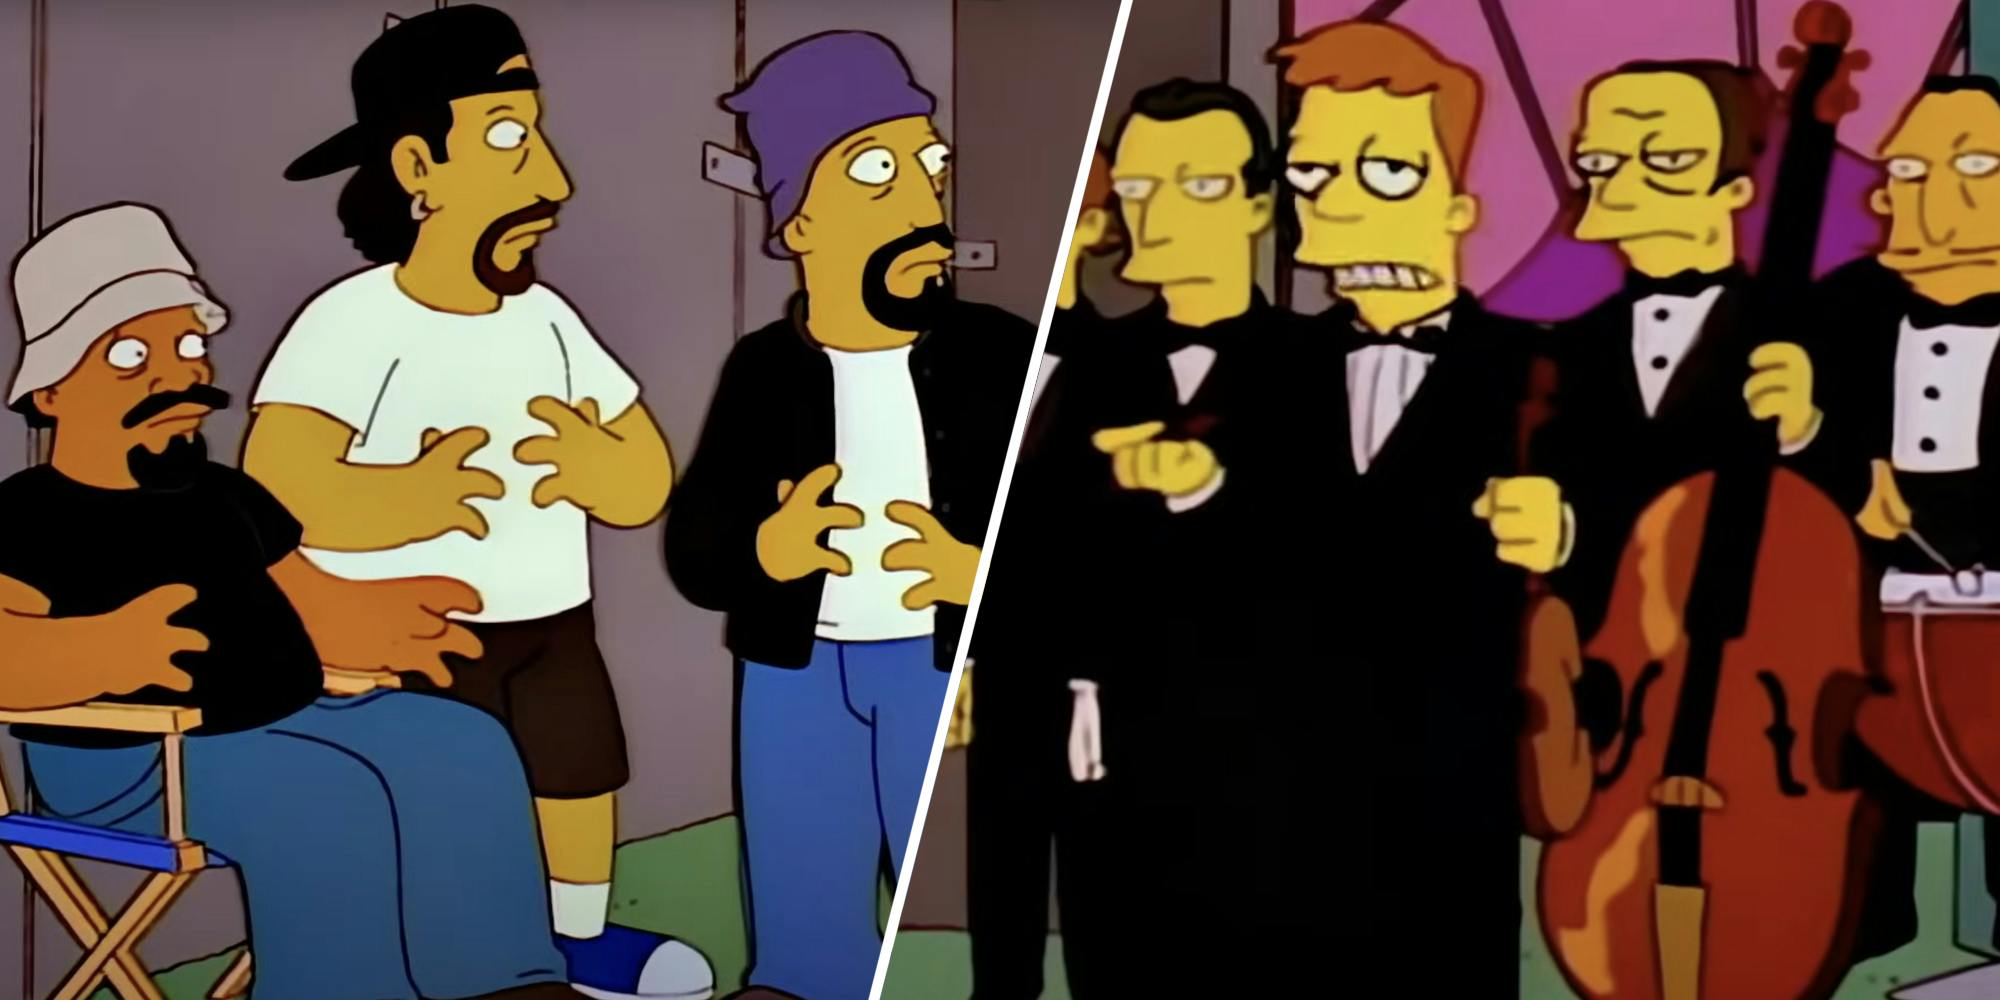 Cypress Hill(l), London Symphony(r), both from an episode of the Simpsons